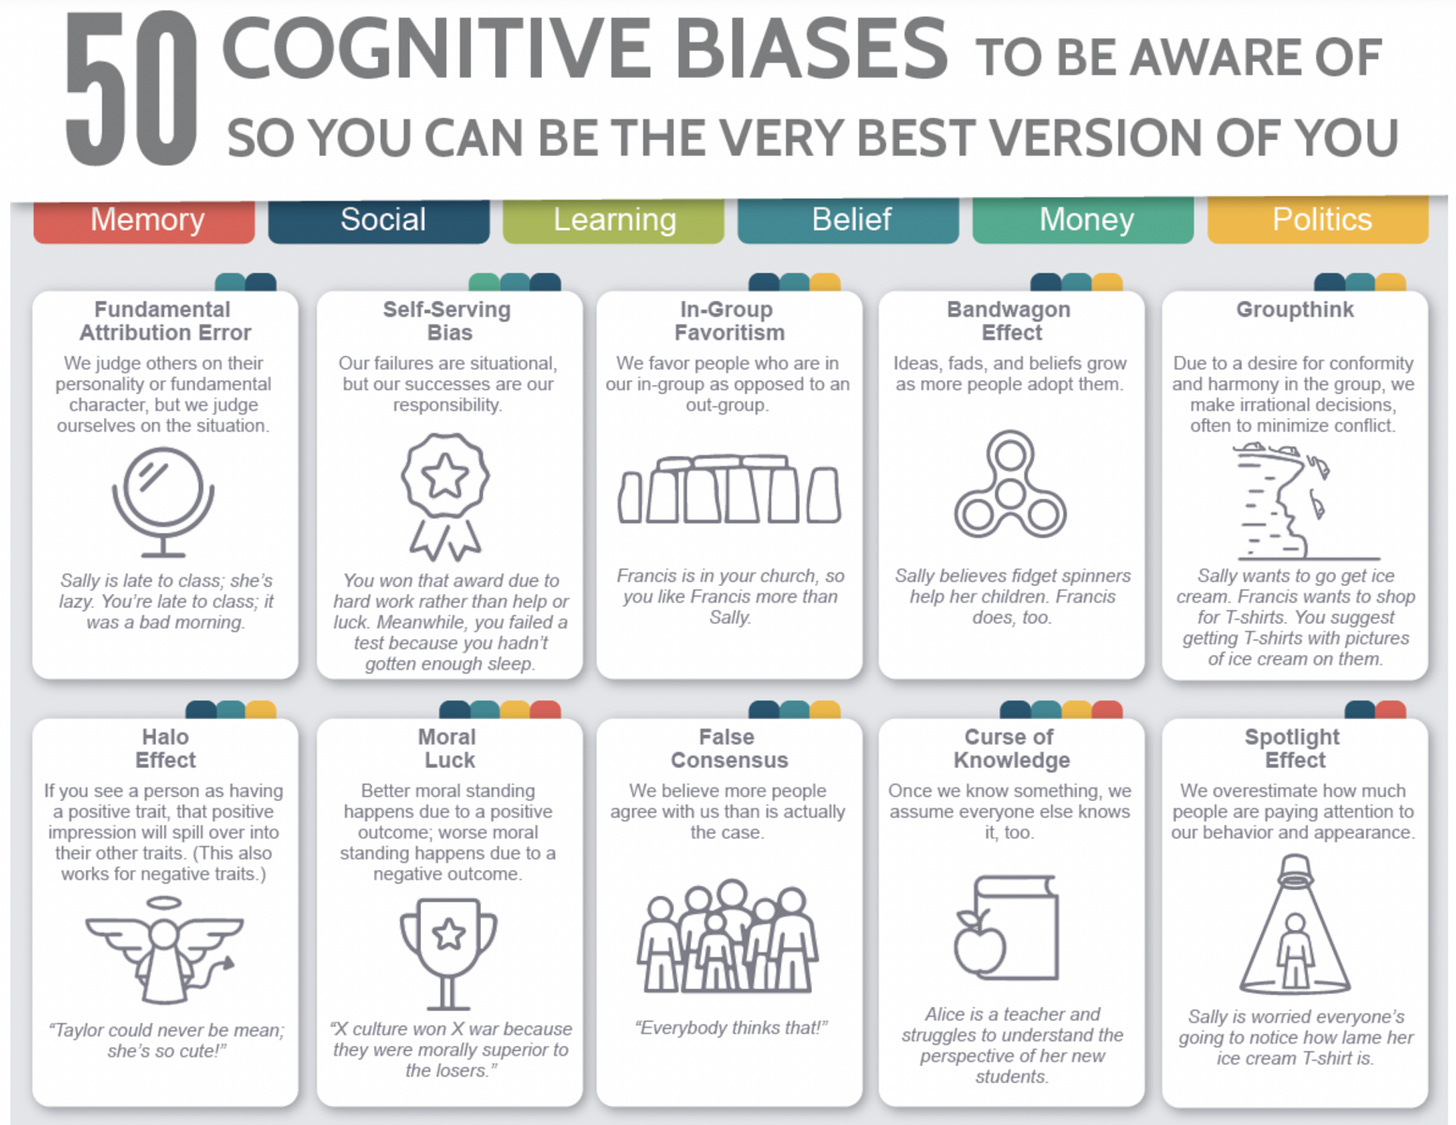 50 Cognitive Biases - The Big Picture